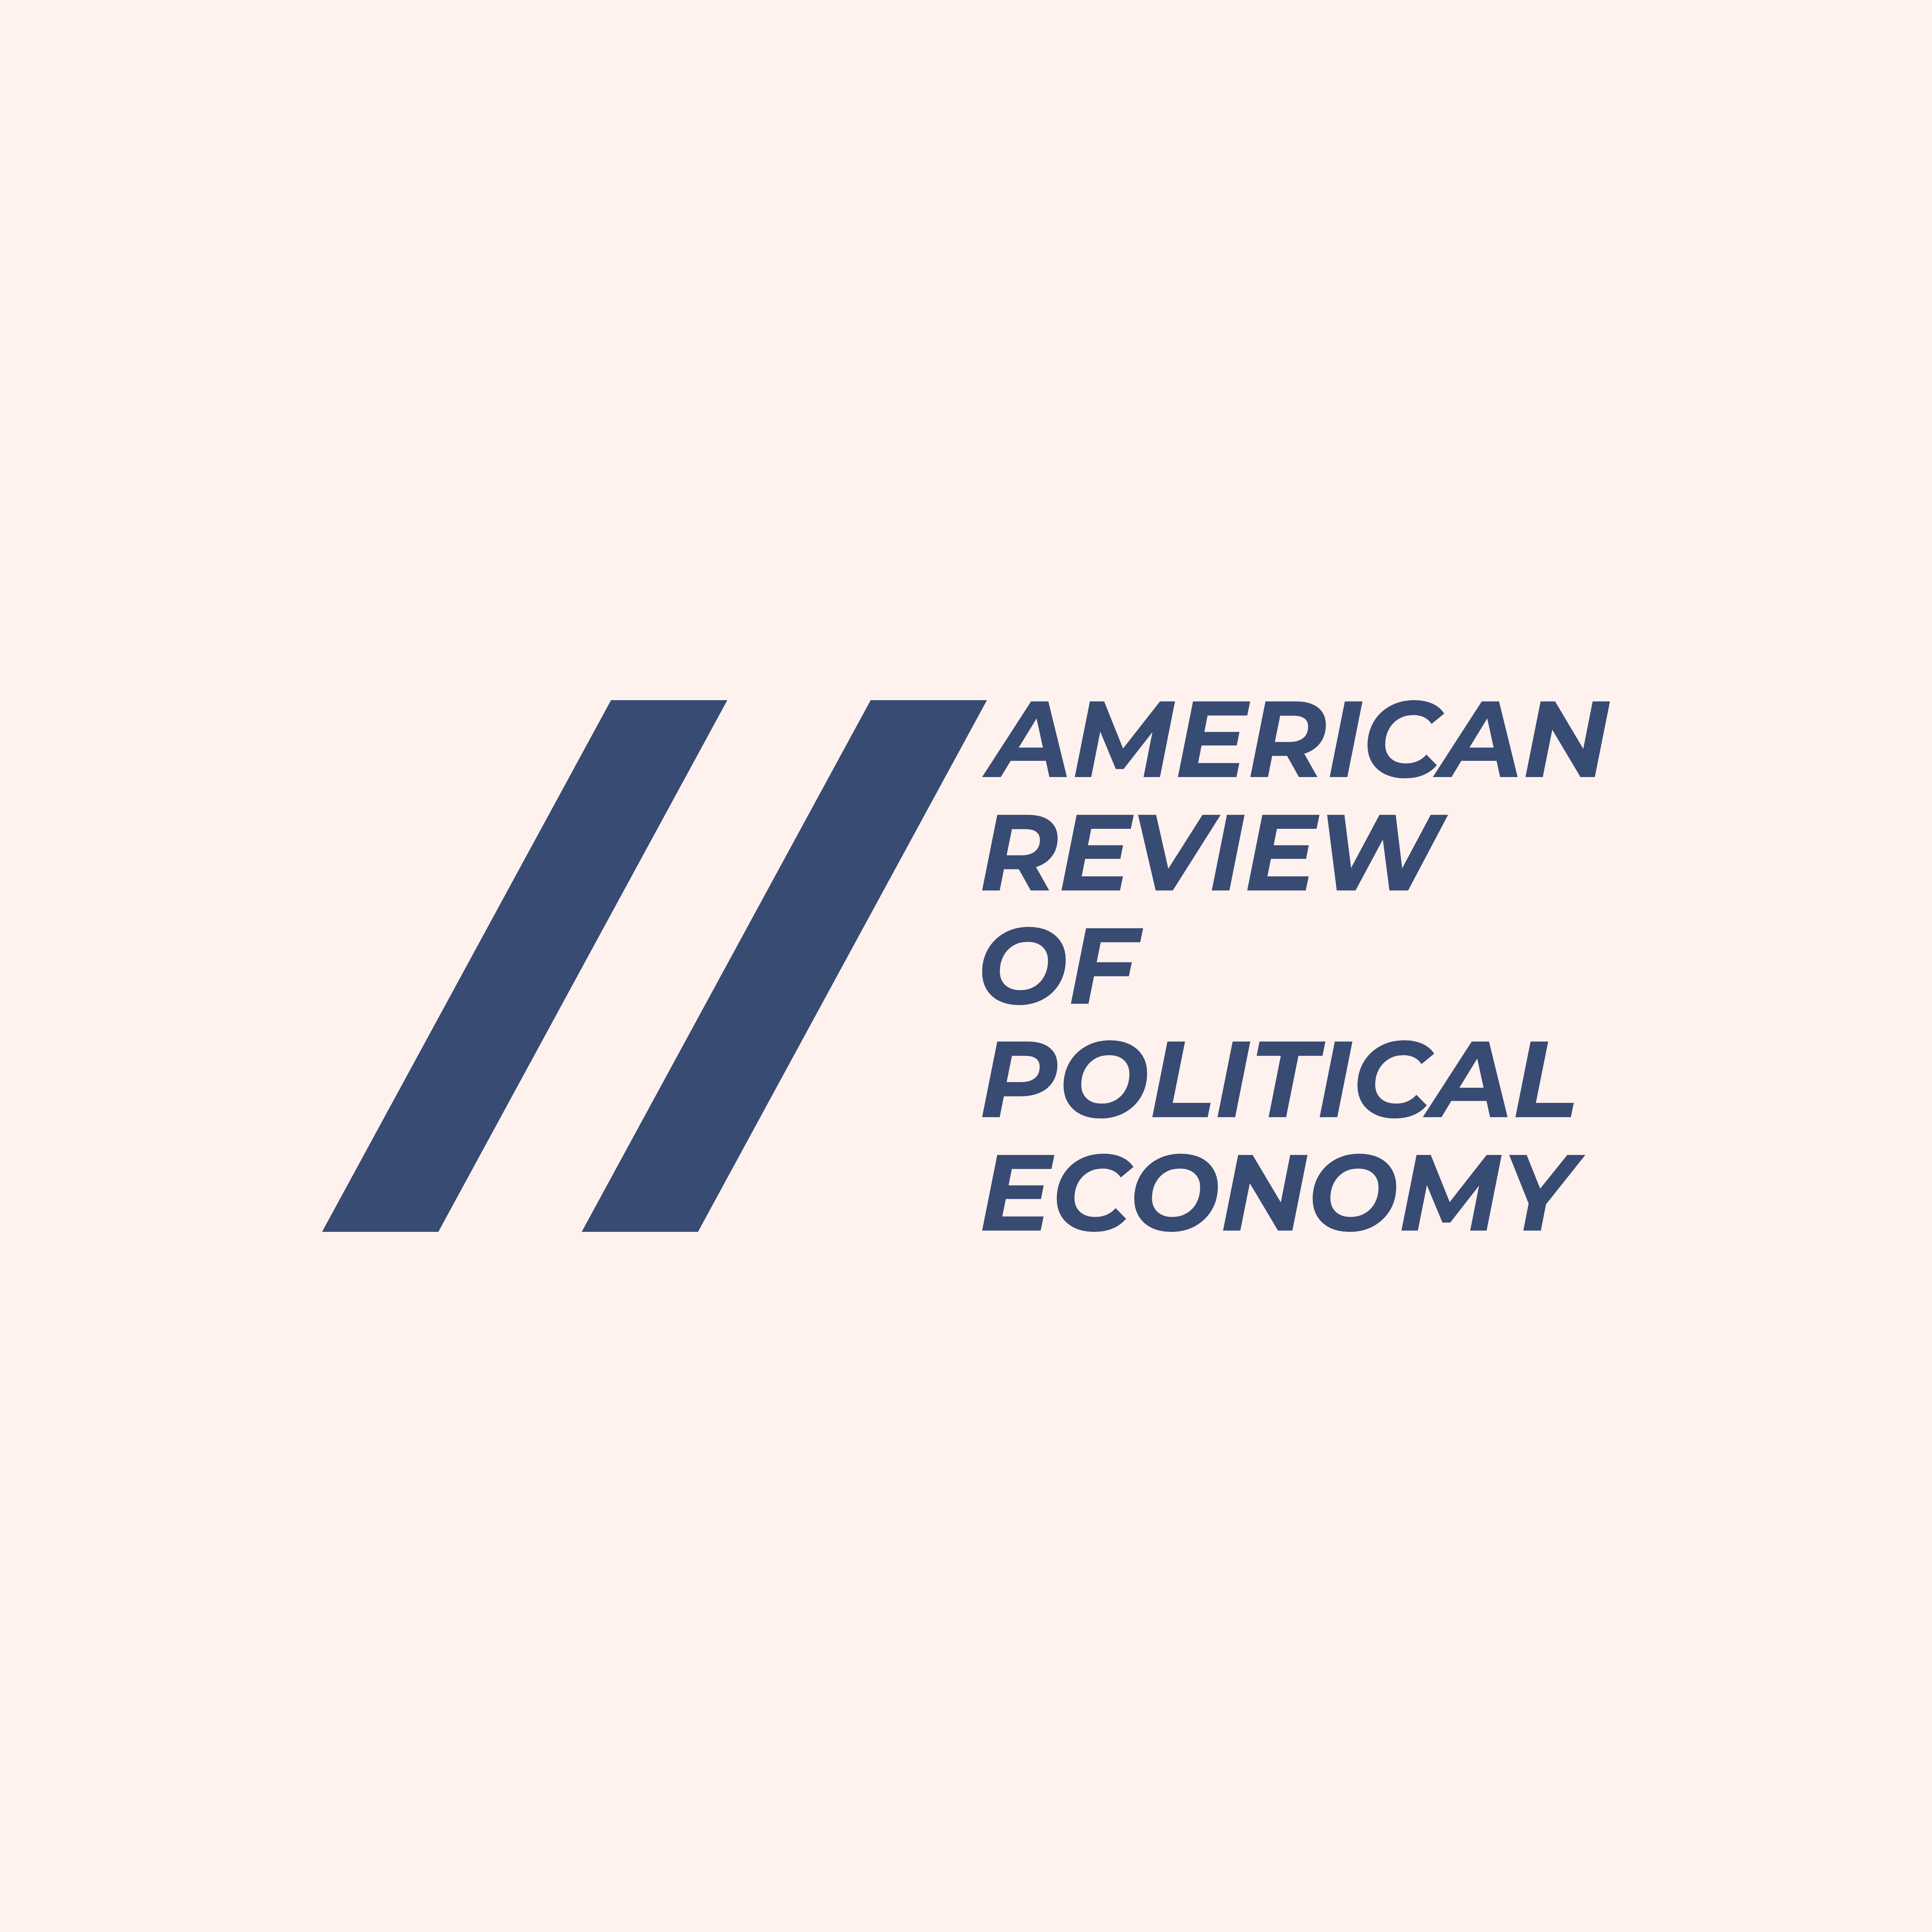 American Review of Political Economy